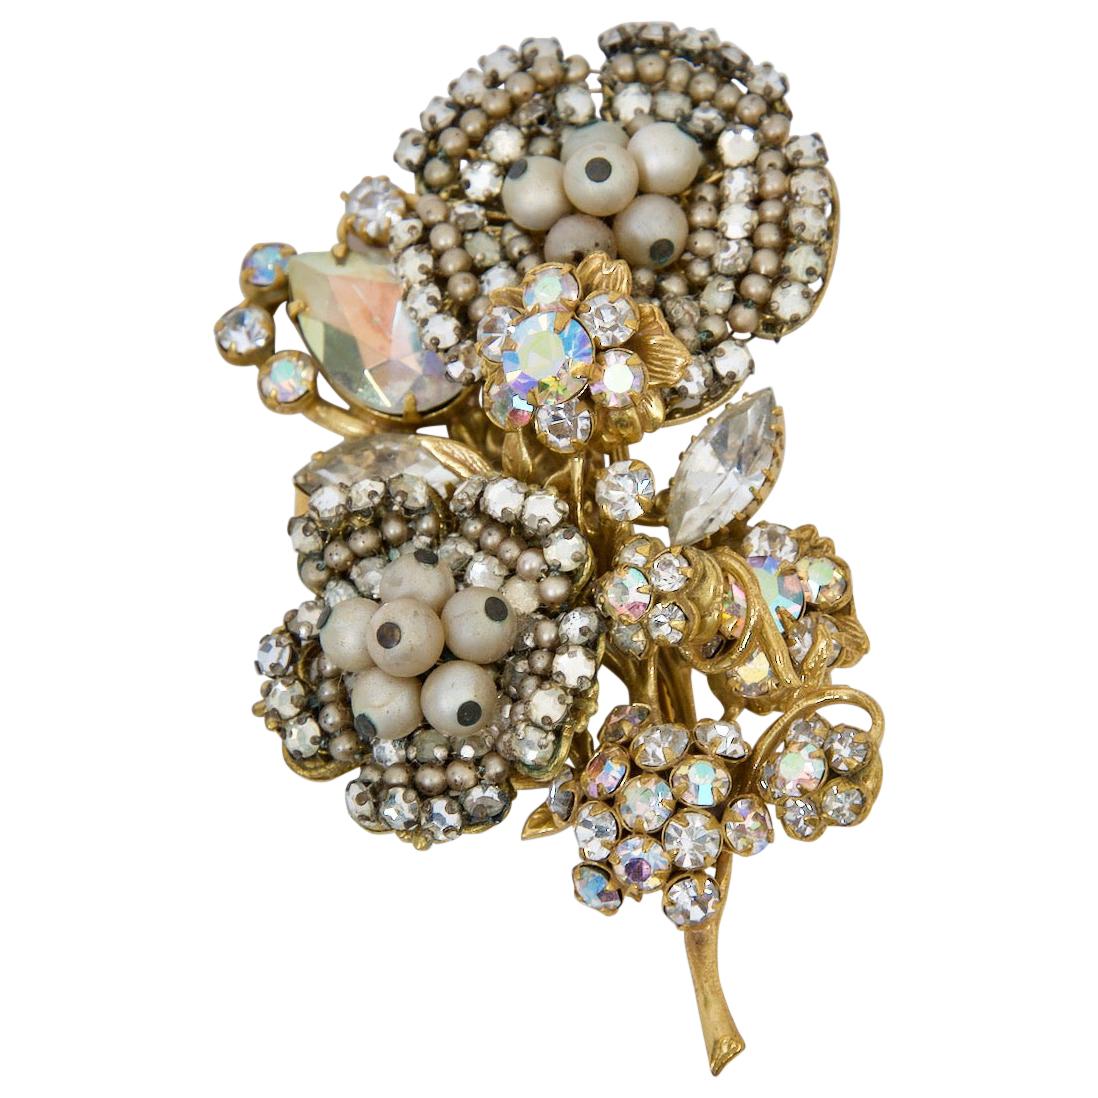 Original by Robert Floral Brooch with Crystals and Pearls